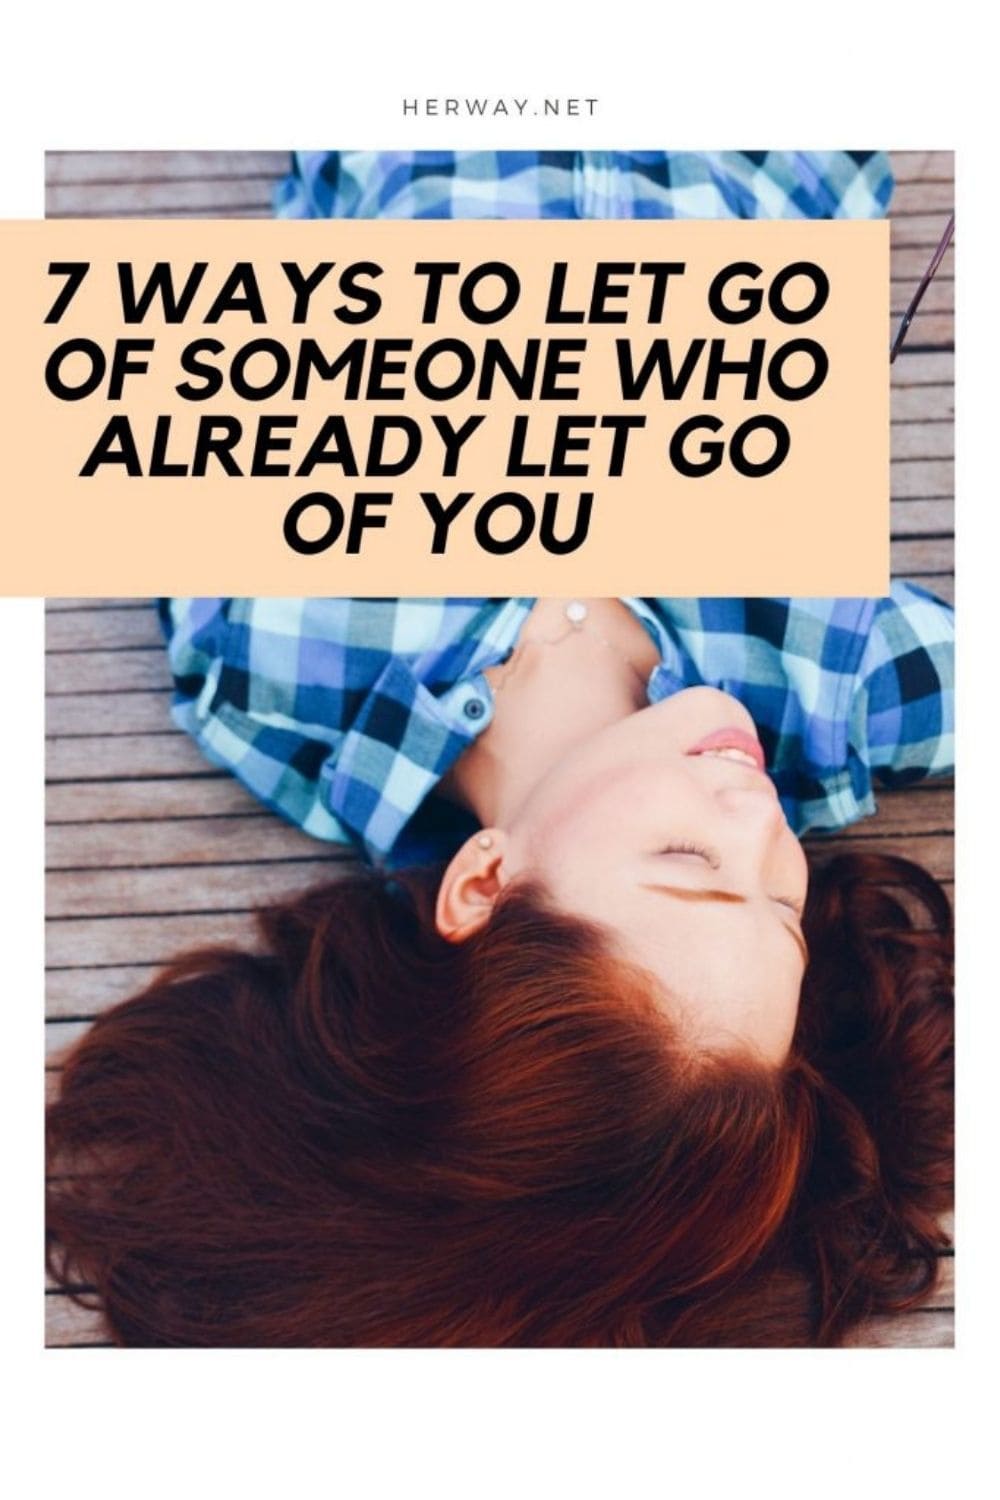 7 Ways To Let Go Of Someone Who Already Let Go Of You